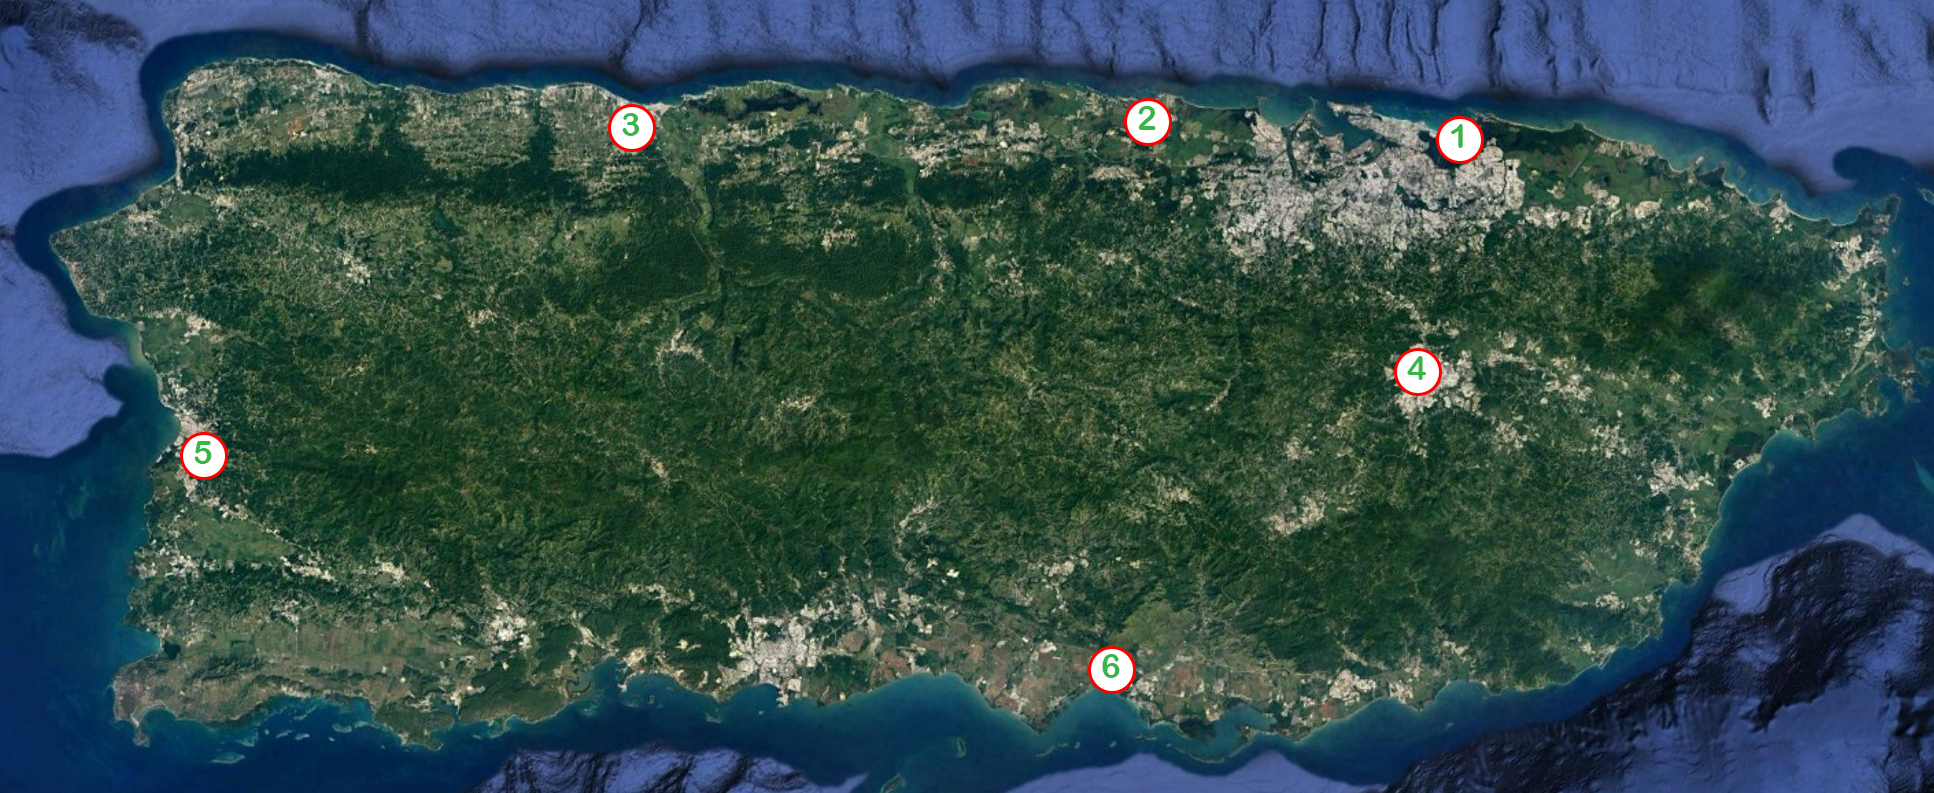 Map of Puerto Rico with numbered location of projects